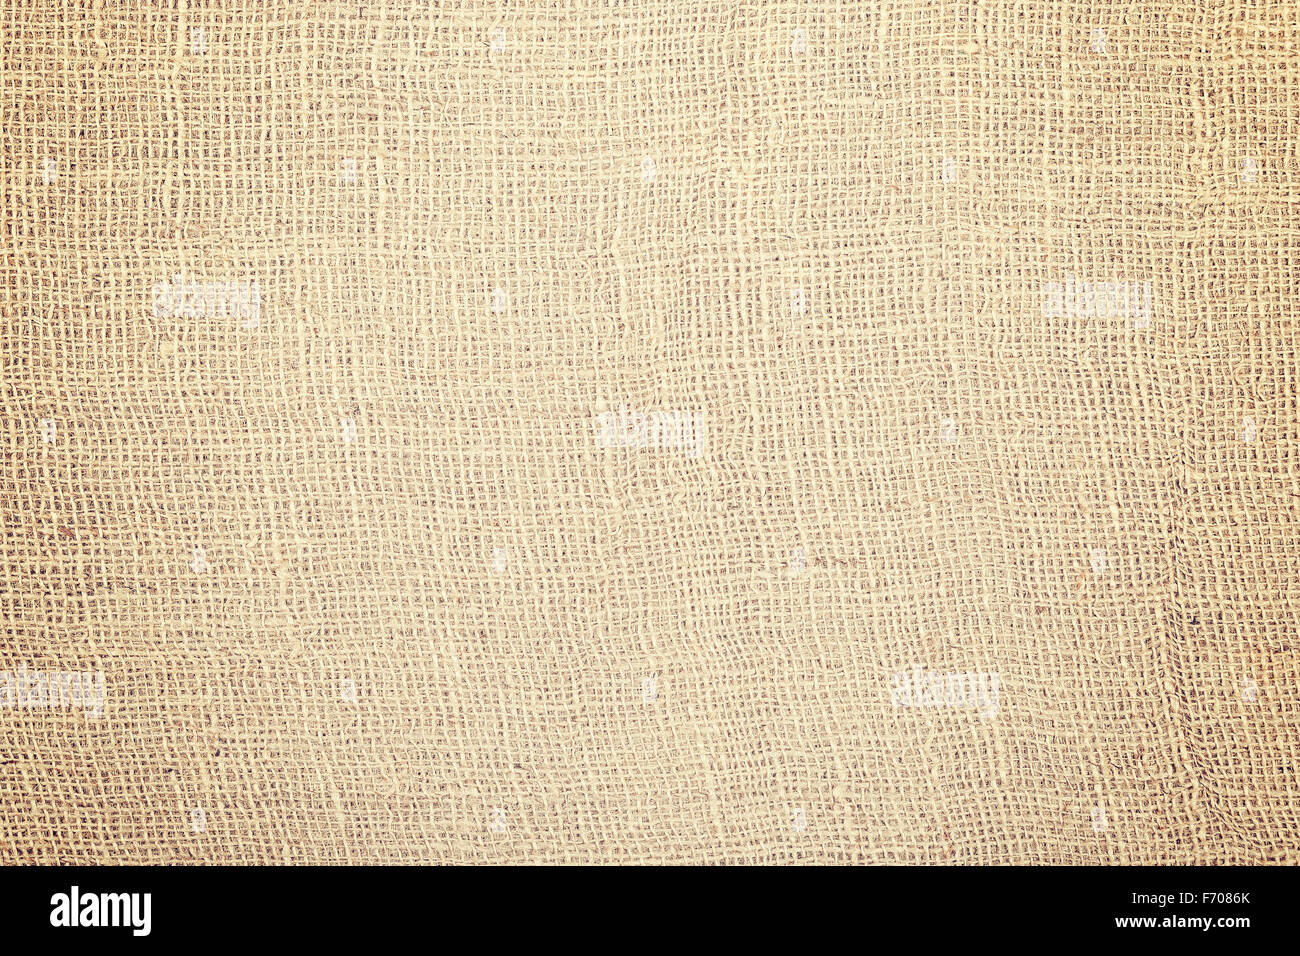 Jute fabric natural texture or background. Stock Photo